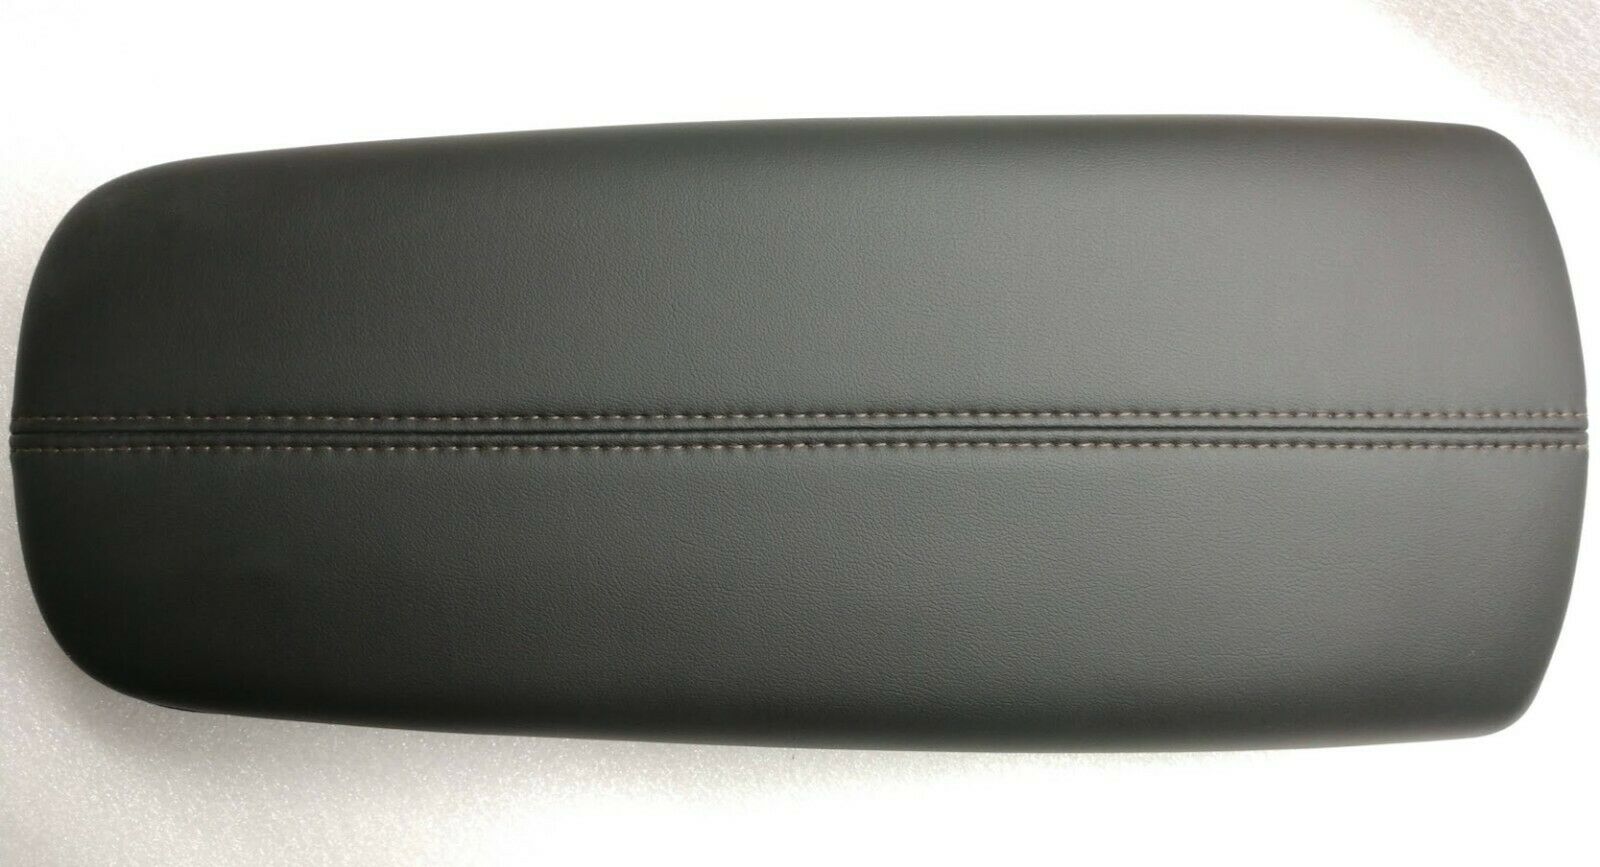 Cadillac XTS 2013+ center console lid jet black with tan NEW